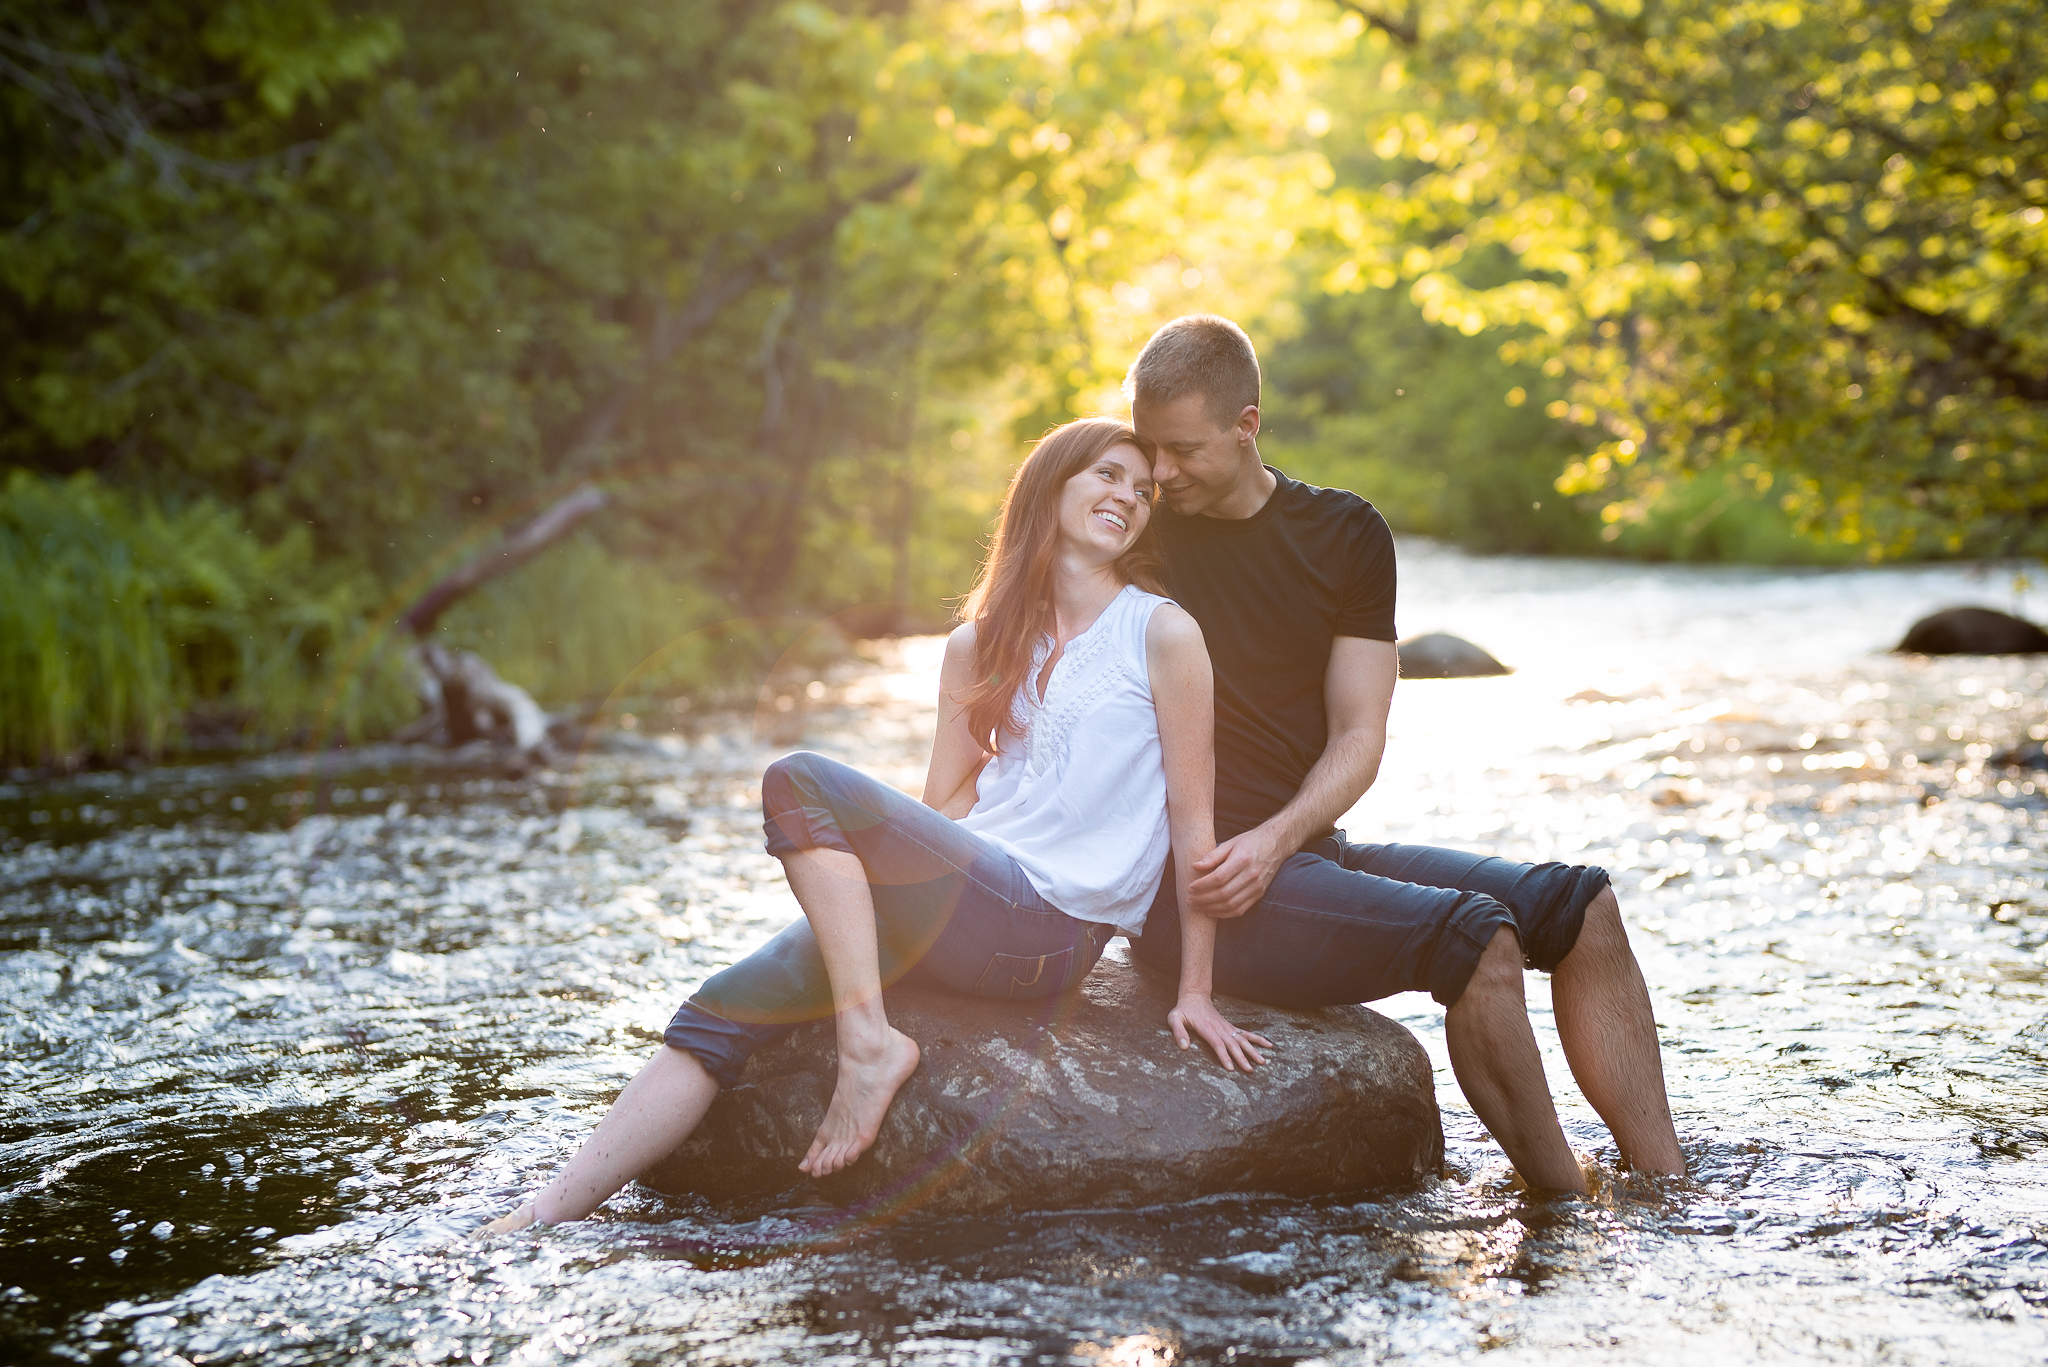 Couples439NaomiLuciennePhotography062019-Edit.jpg